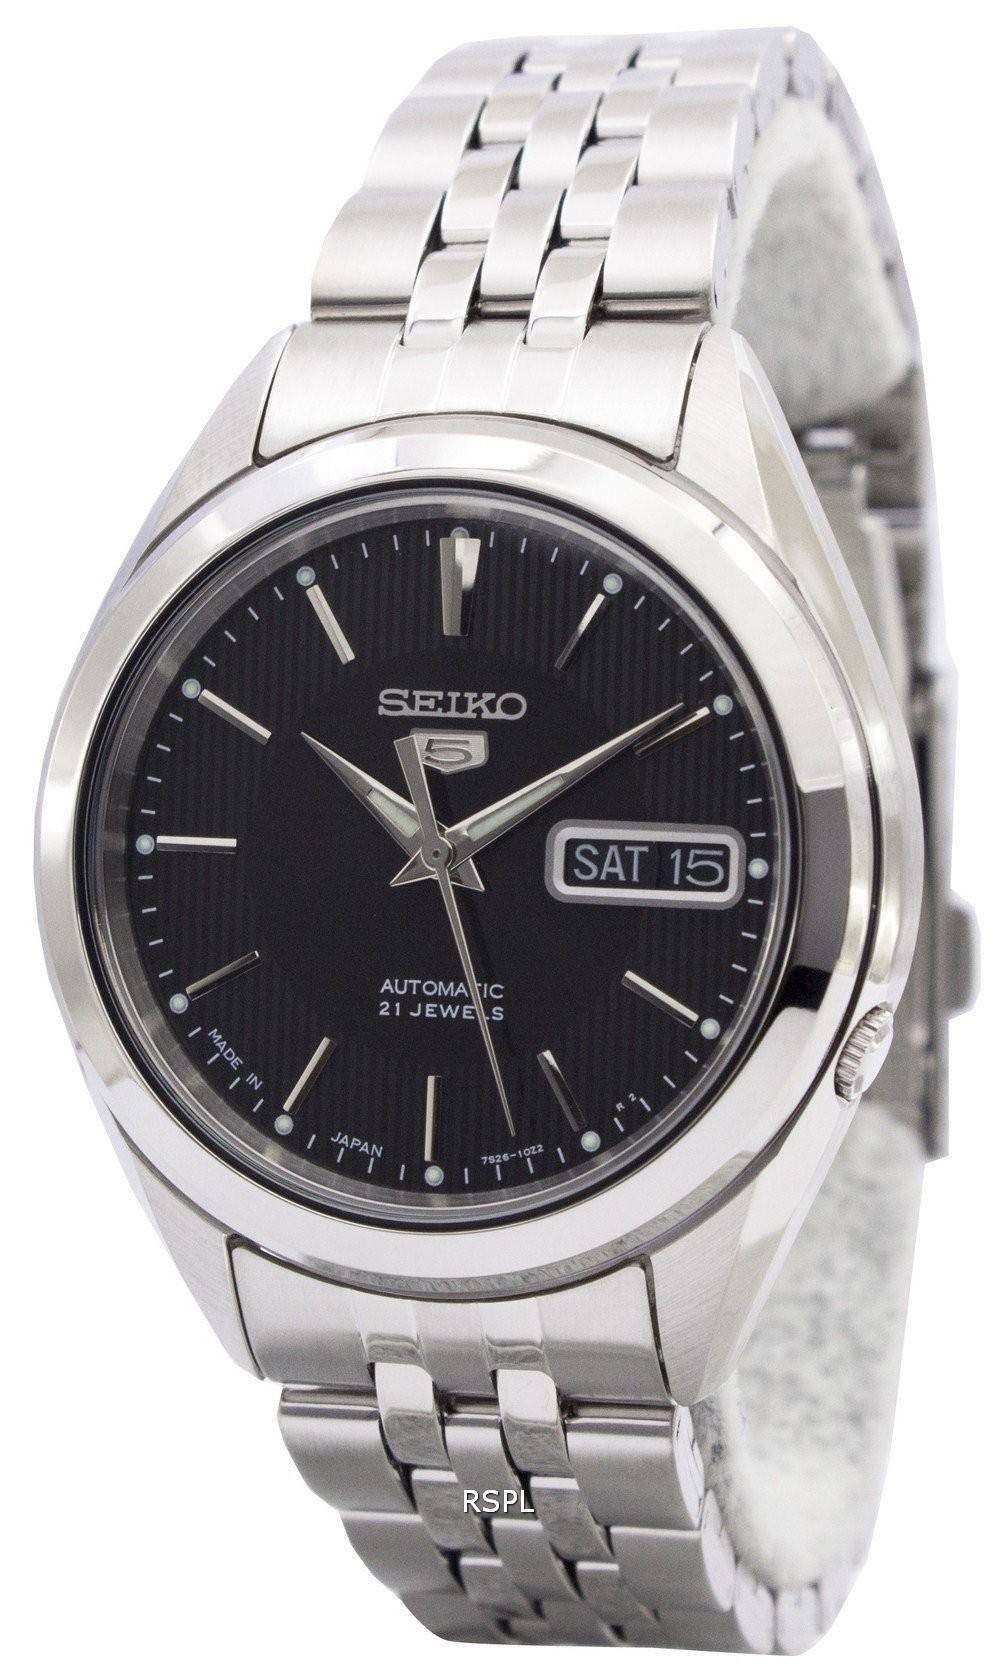 Seiko Men's Mechanical Watch Analog, Black Dial Silver Stainless Band, SNKL23J